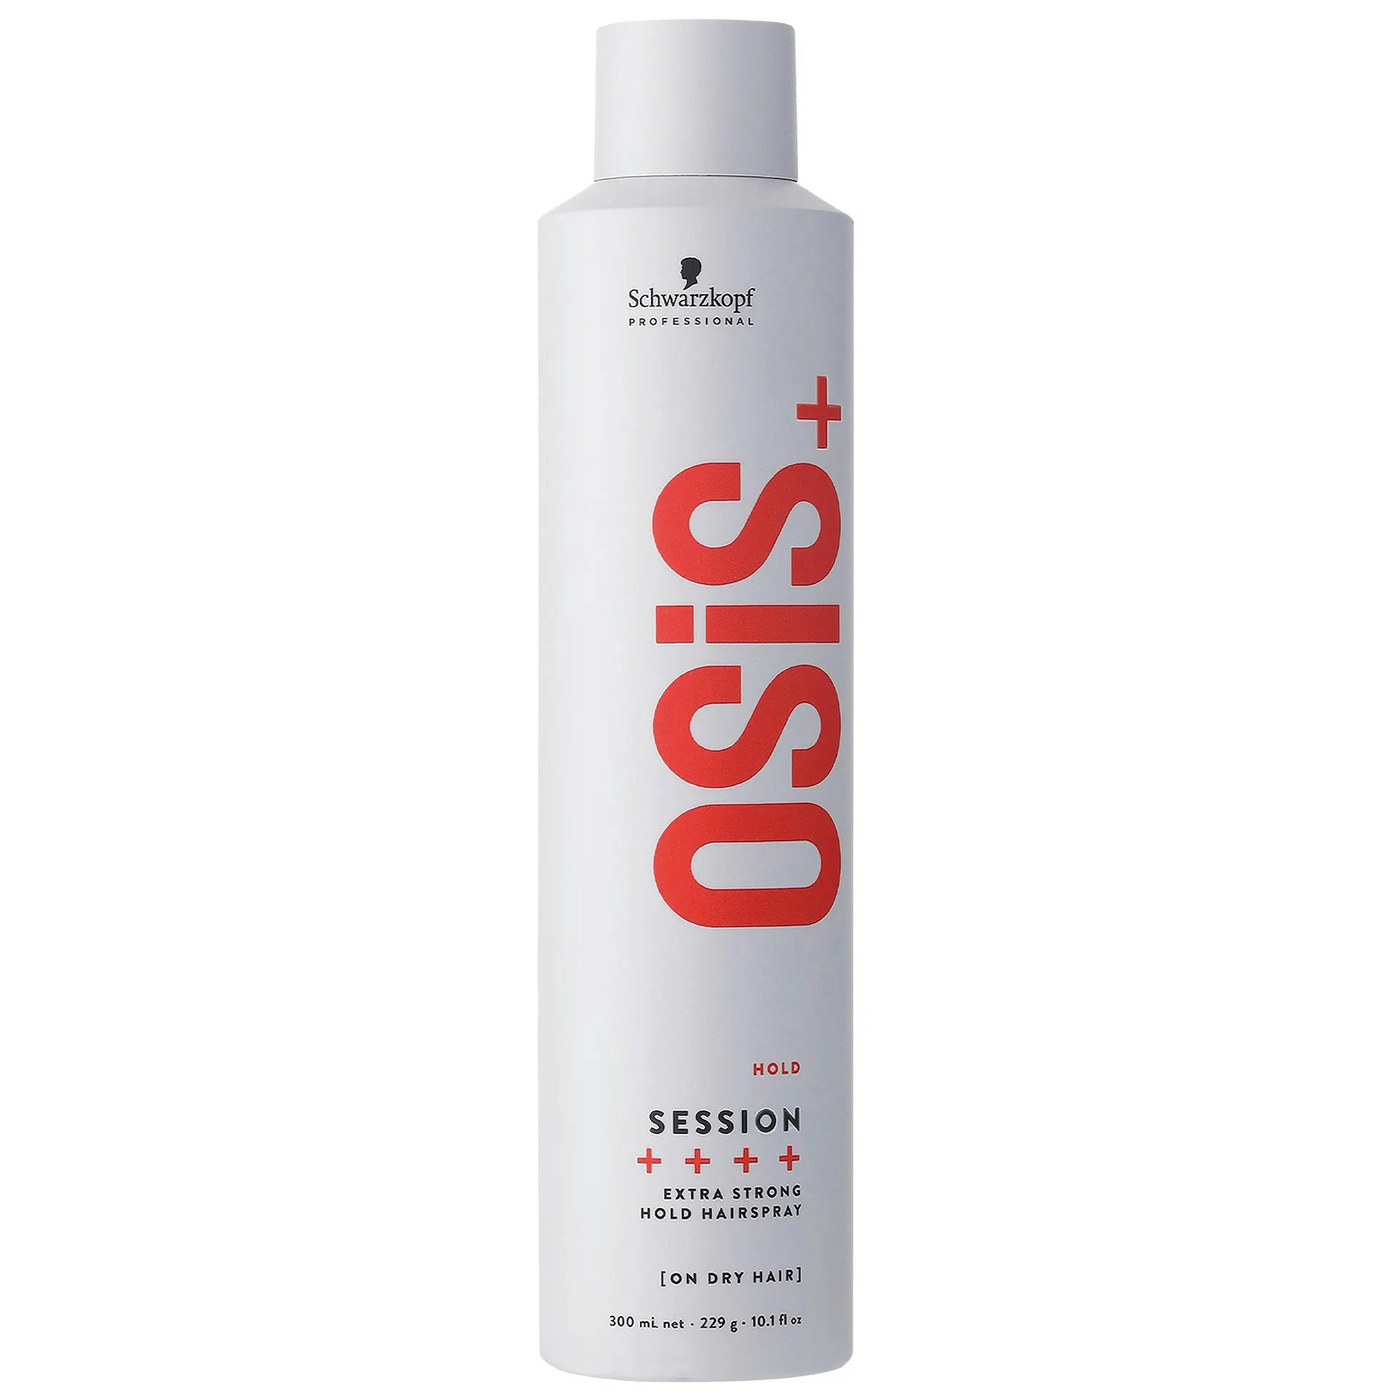 Schwarzkopf Osis+ Session - Extreme Strong Hold Hairspray 300ml (New Range)